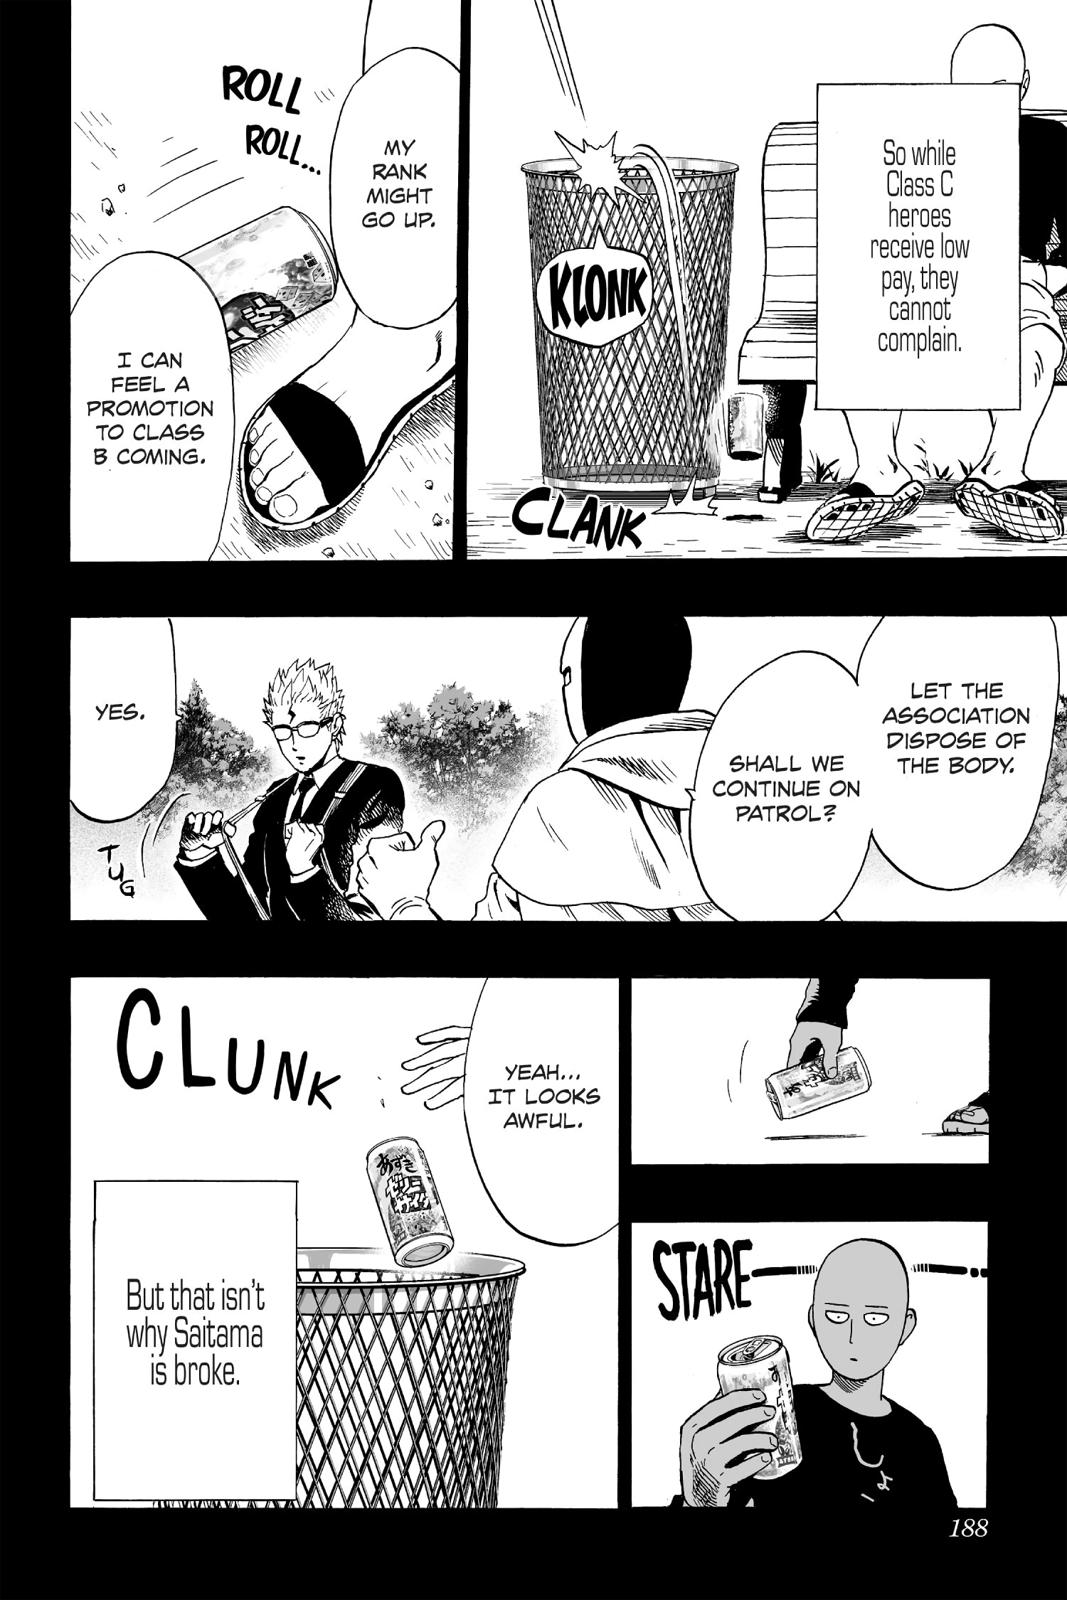 One-Punch Man, Punch 29 image 28